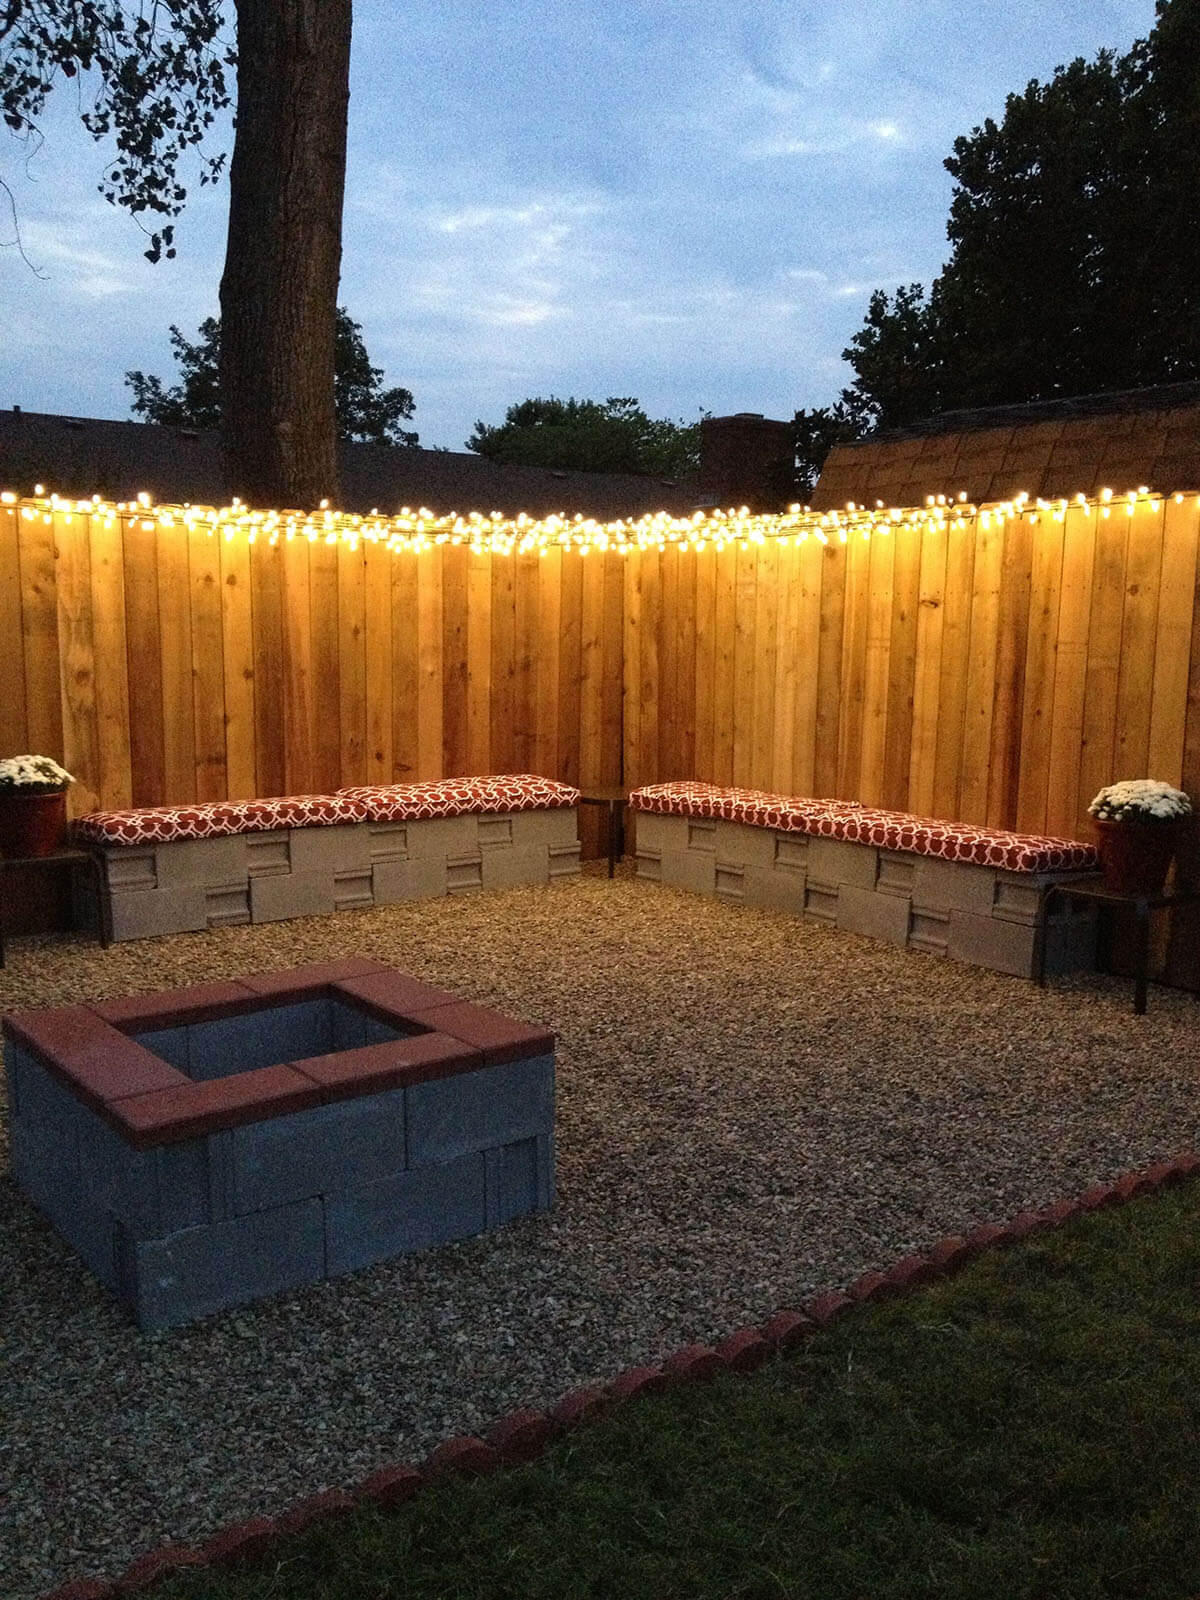 lit up fence in backyard at night with bench seating